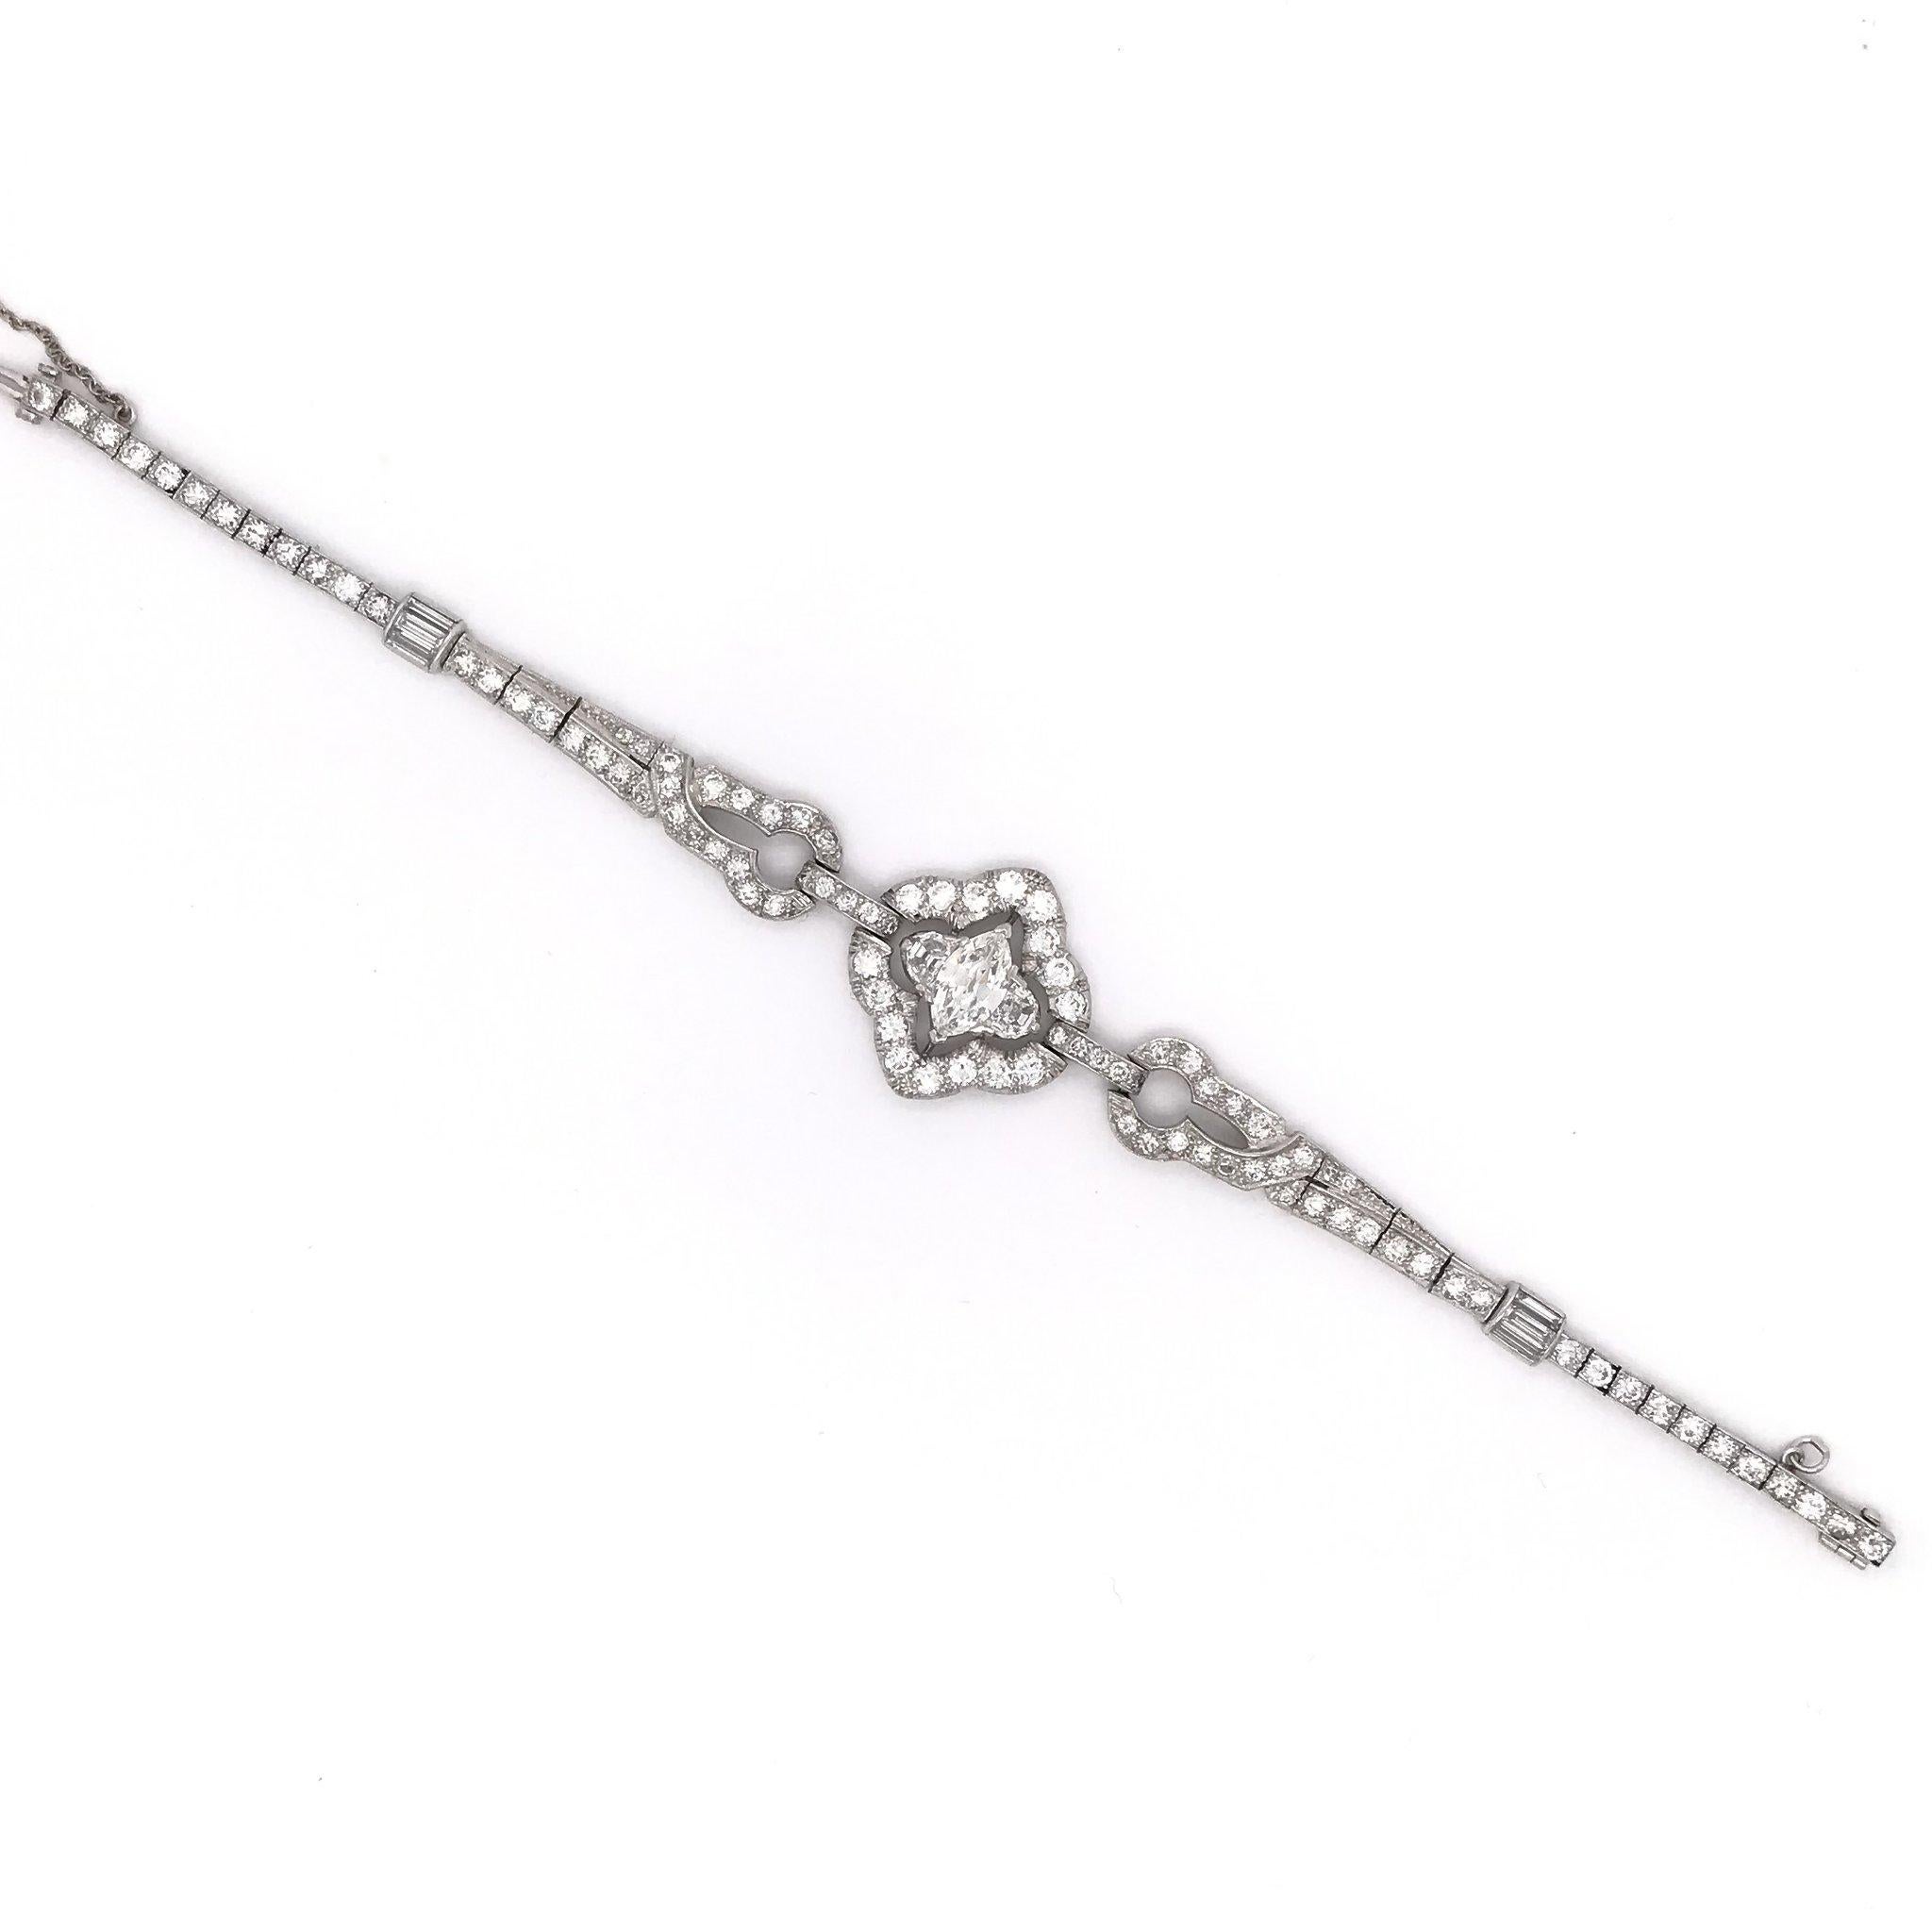 This absolutely stunning antique diamond bracelet was handcrafted sometime during the Art Deco design period ( 1920-1940 ). The setting is platinum and features a beautiful marquise cut center diamond measuring approximately 0.75 carats. The center